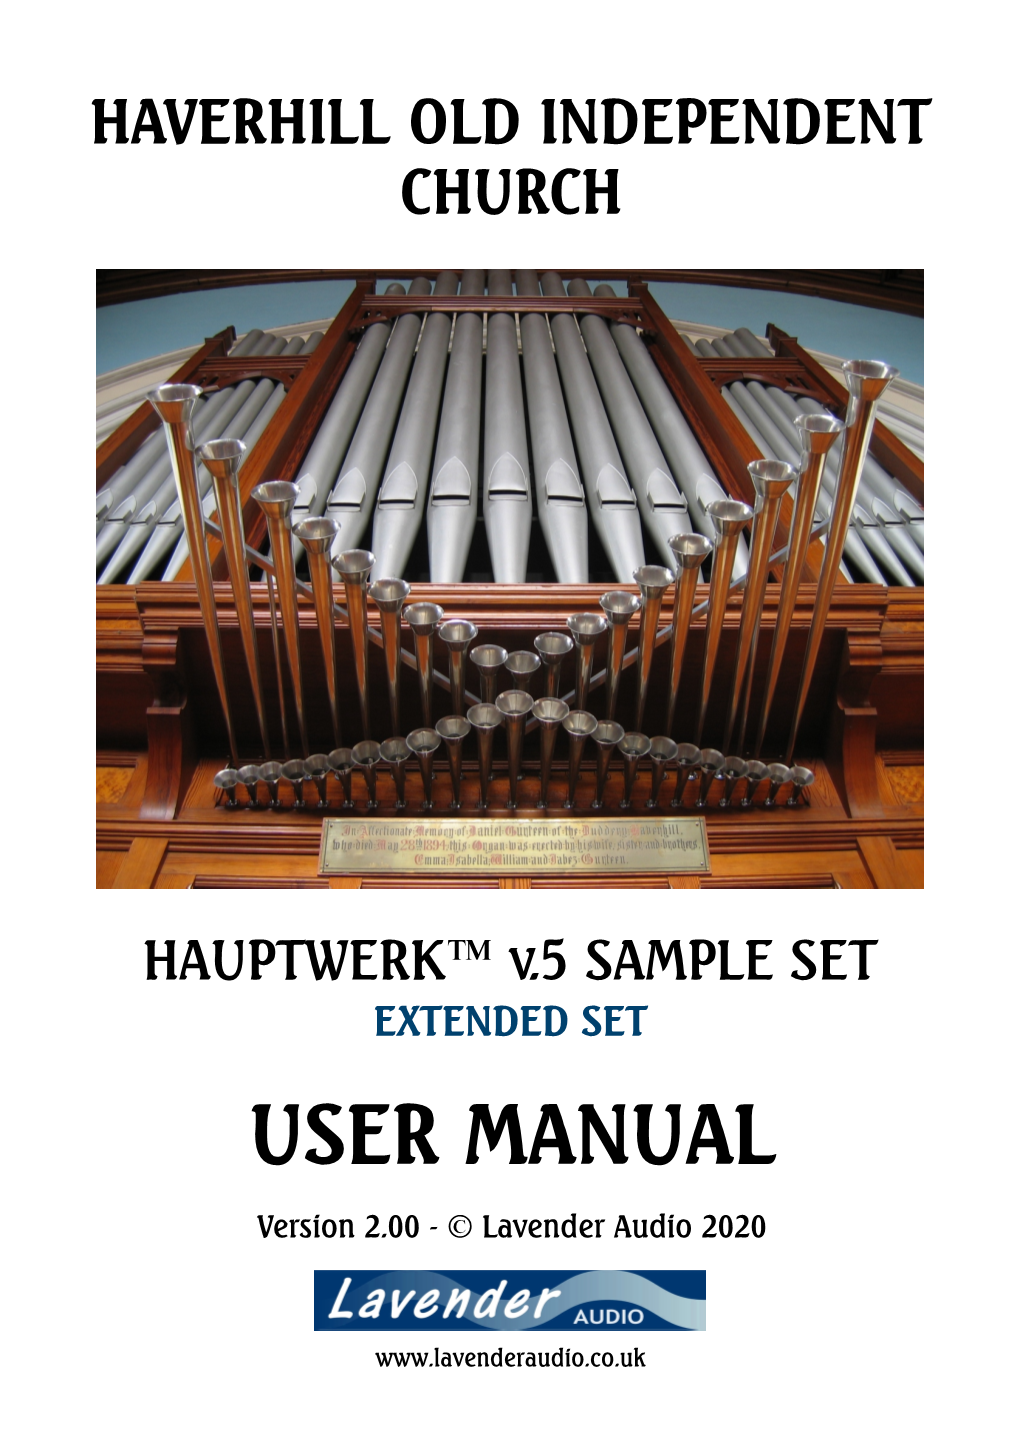 User Manual Available Either Online Or on the Installation Media to Familiarise Yourself with the Various Features It Offers